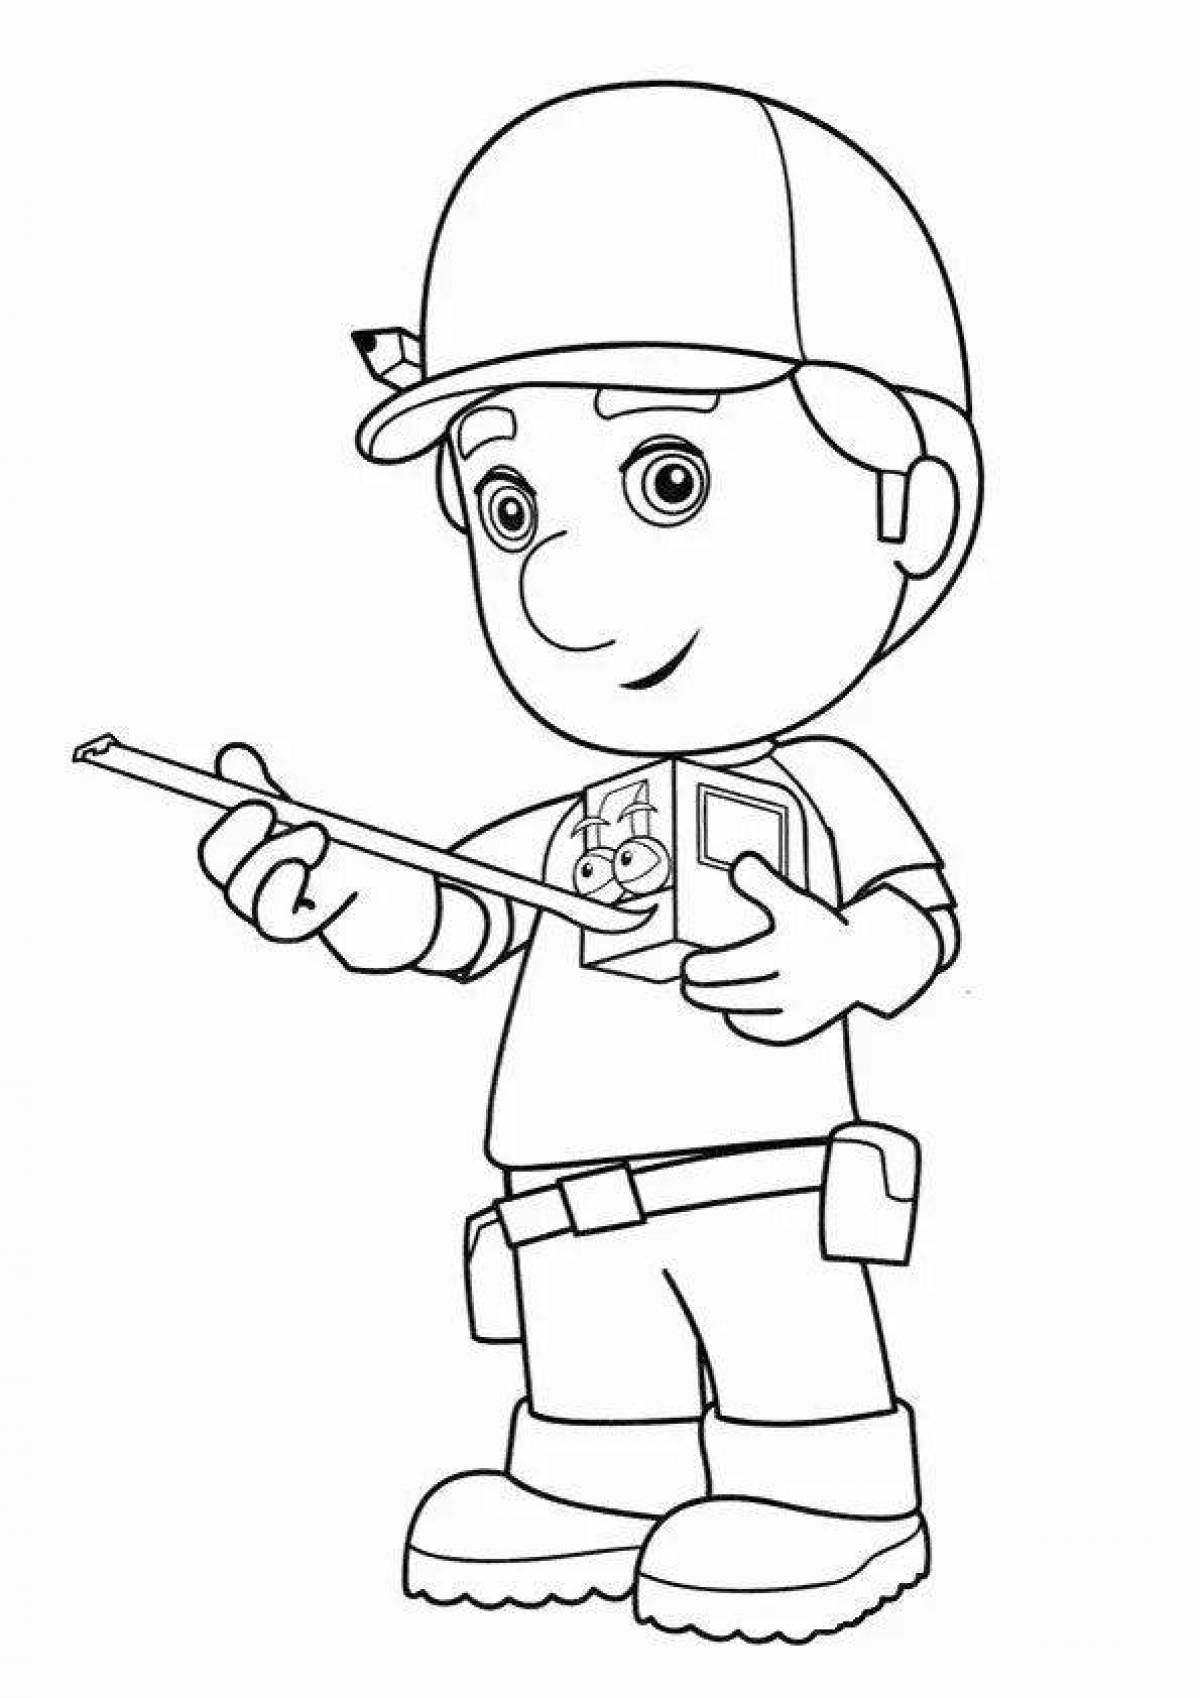 Exquisite Gear Coloring Page